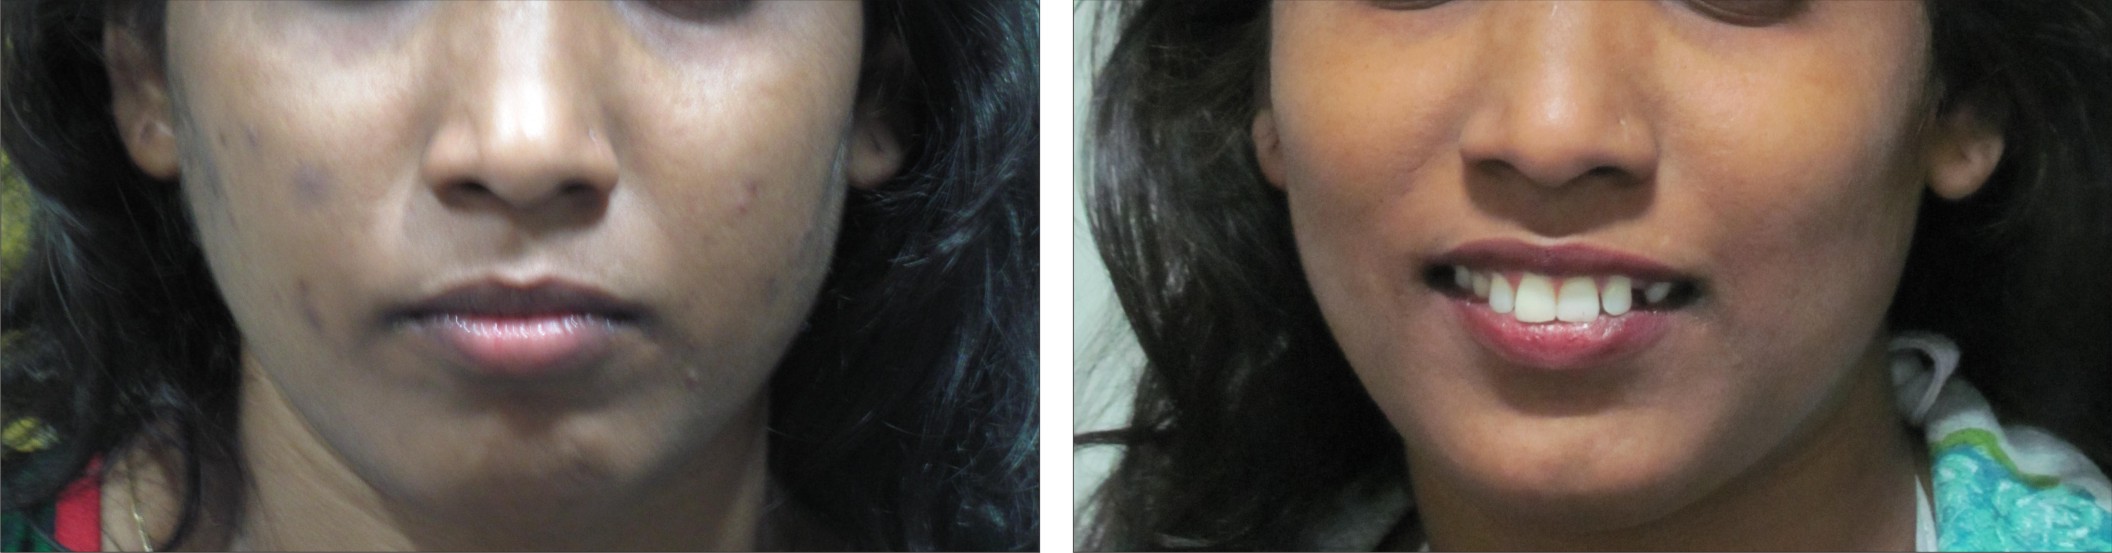 Chemical Peel Image Two